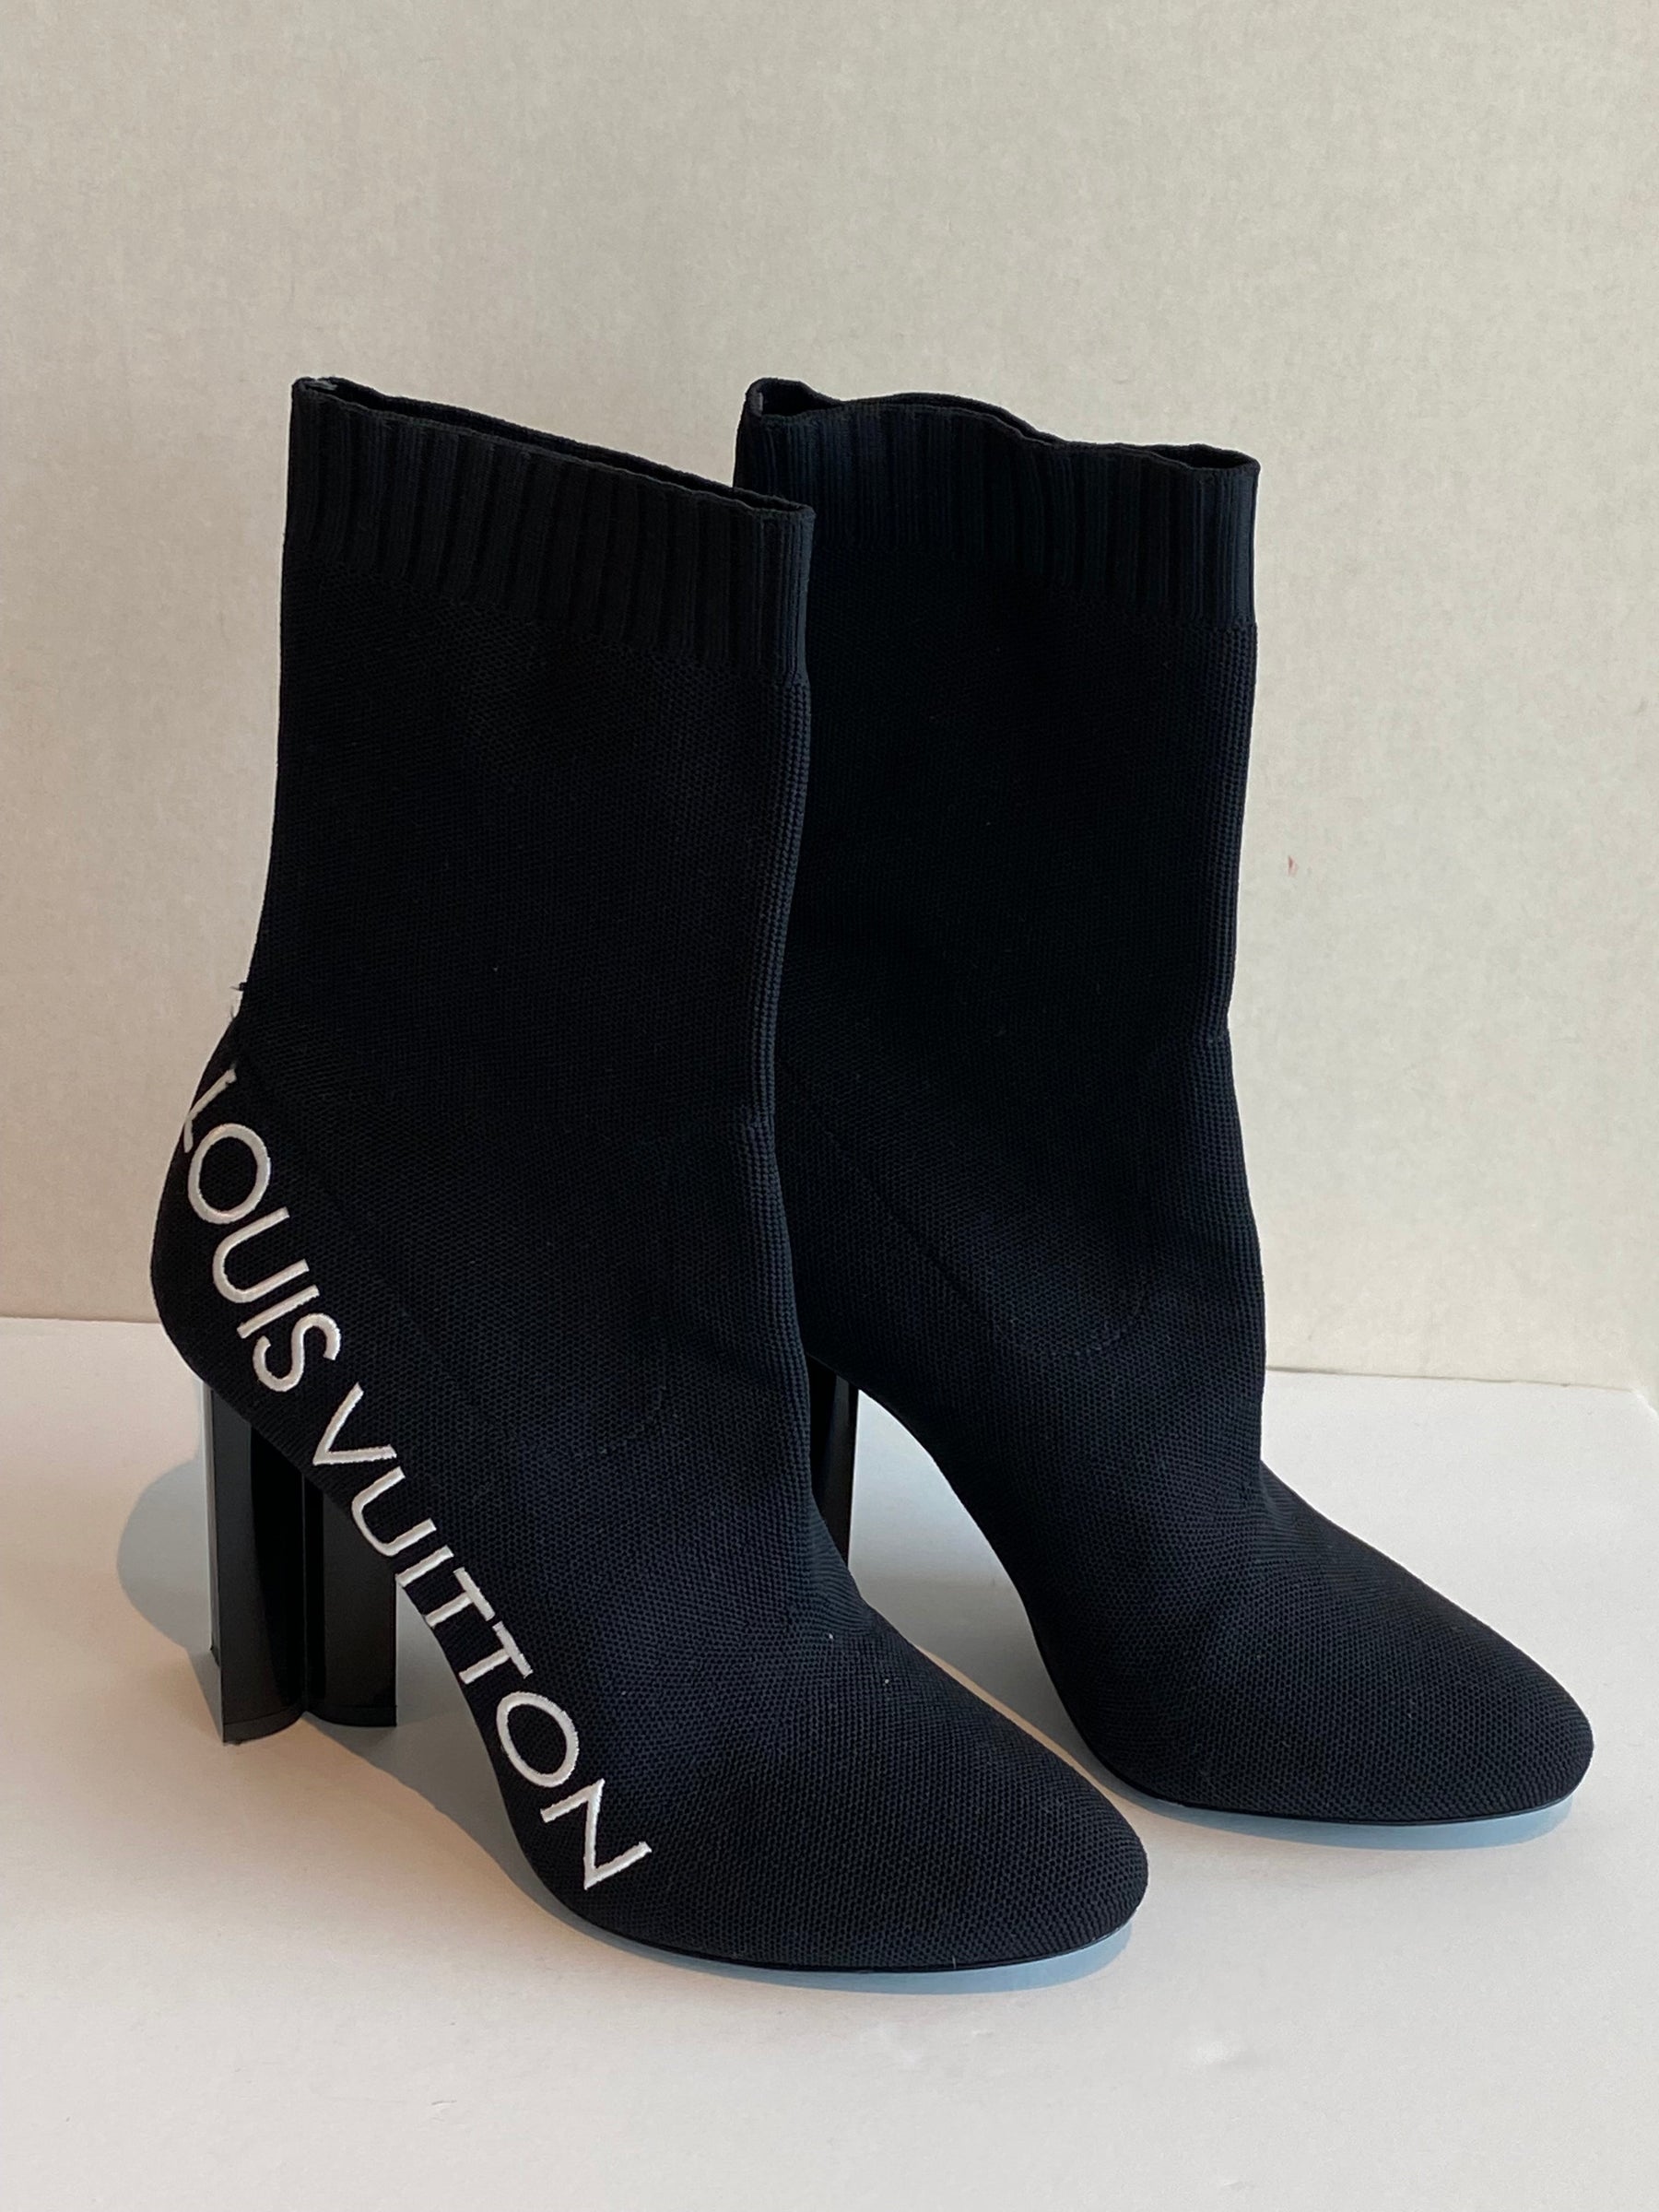 Louis Vuitton Silhouette Ankle Boots Sides